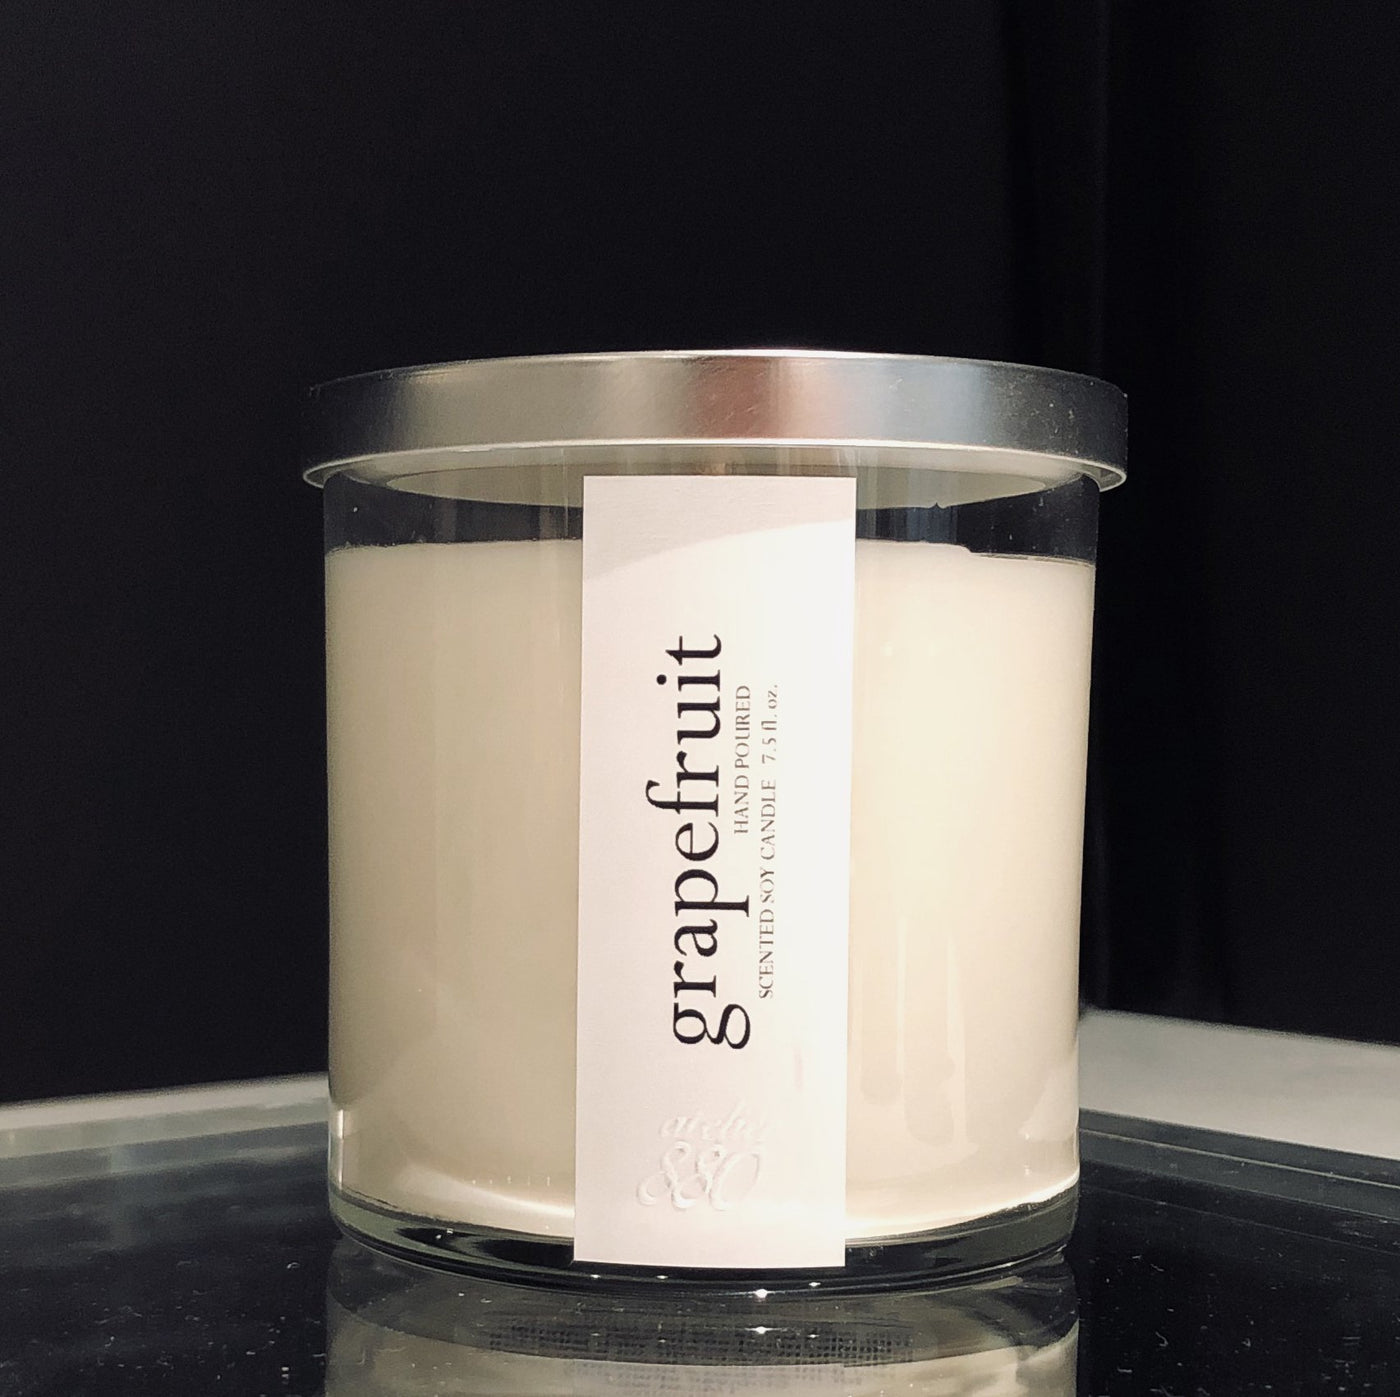 Grapefruit Scented Candle - Roses & Chains | Fashionable Clothing, Shoes, Accessories, & More